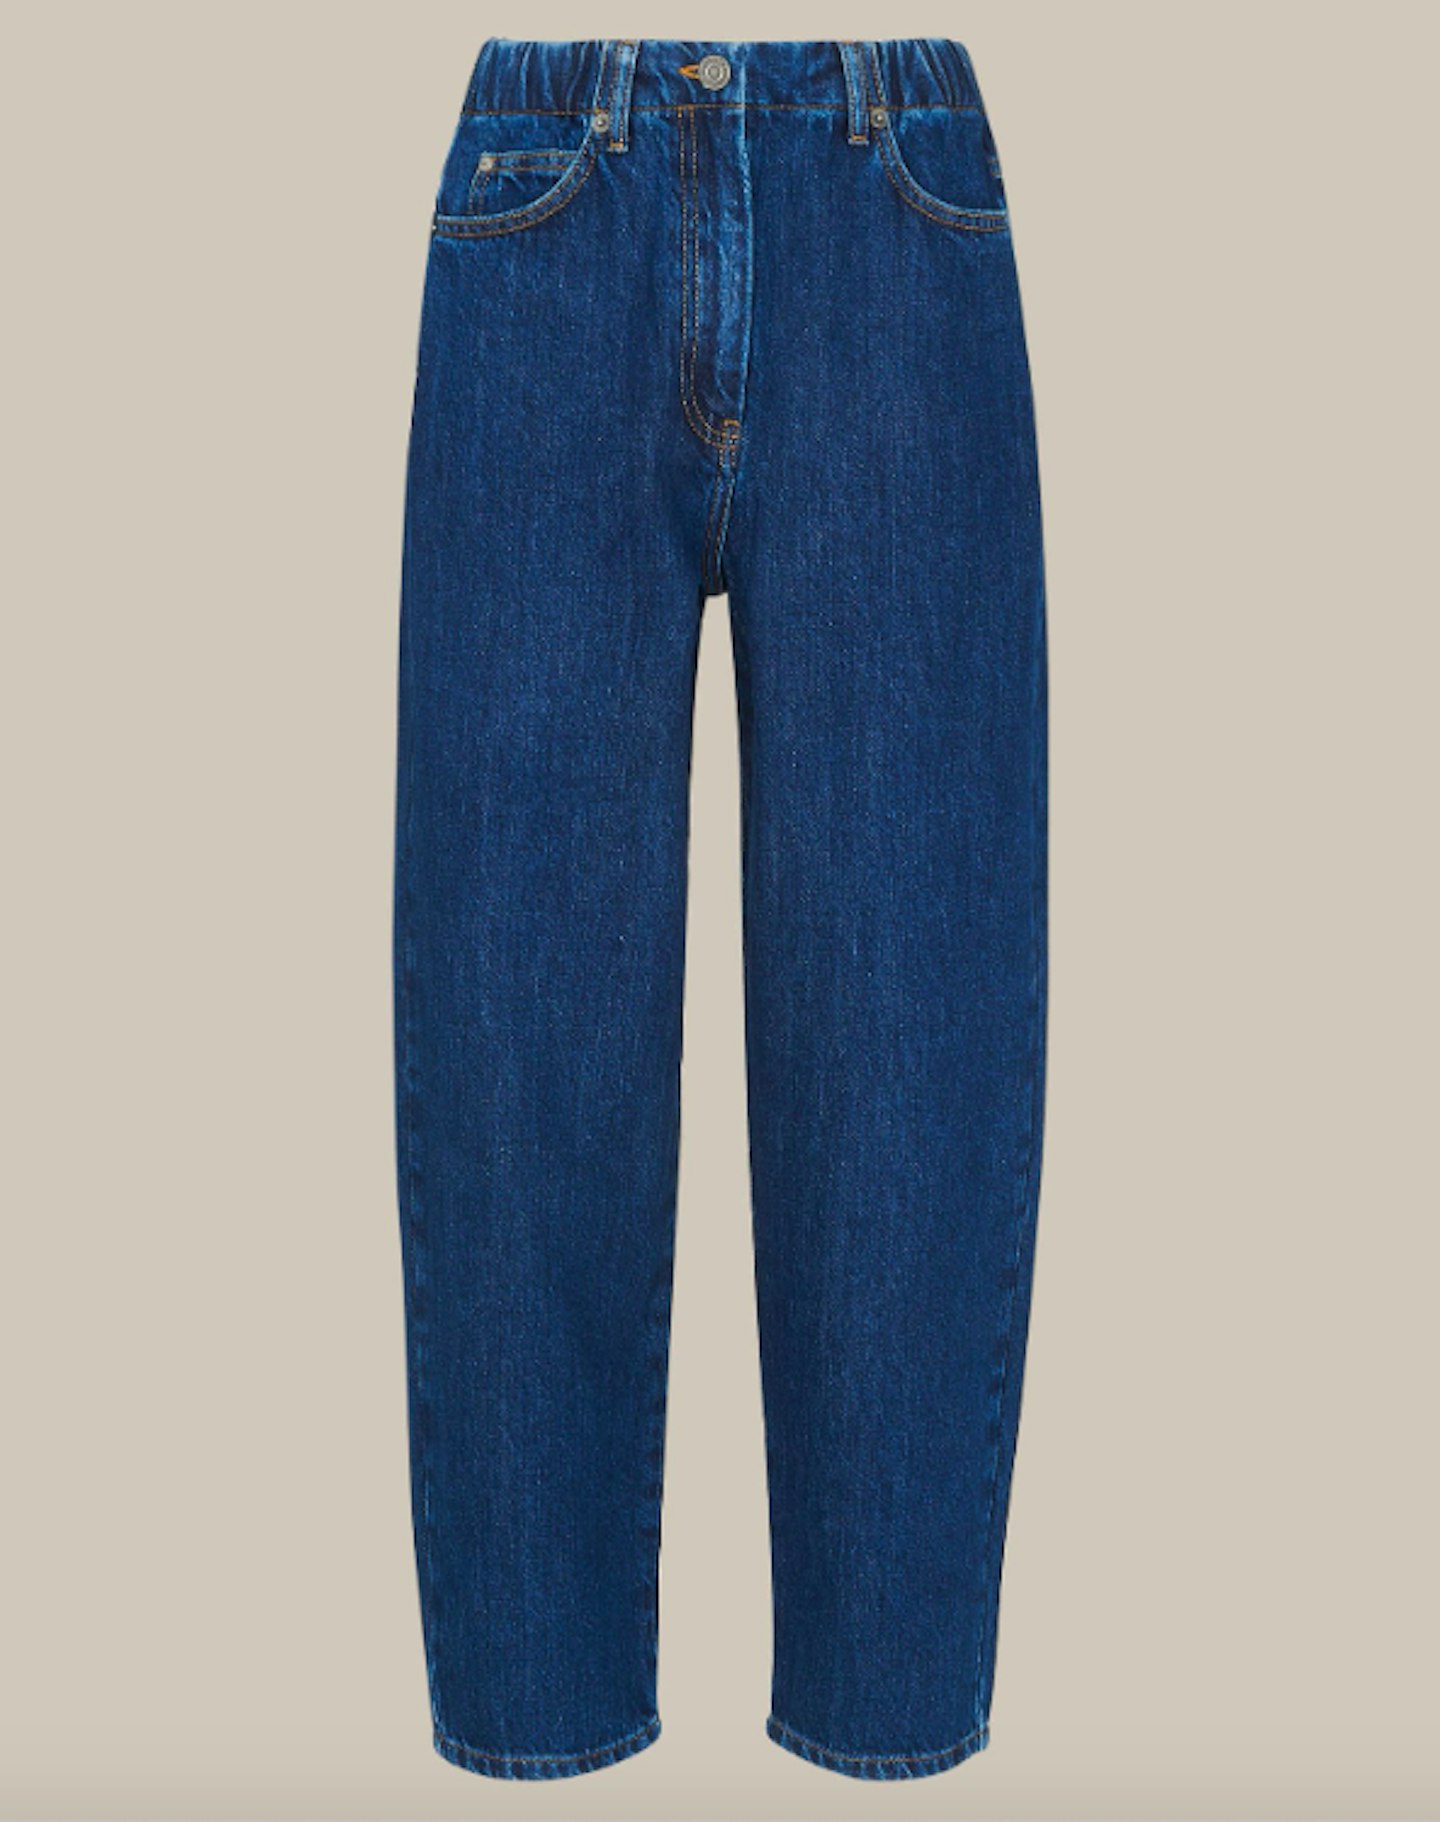 Whistles, Authentic Elastic Waist Jean, WAS £99 NOW £49